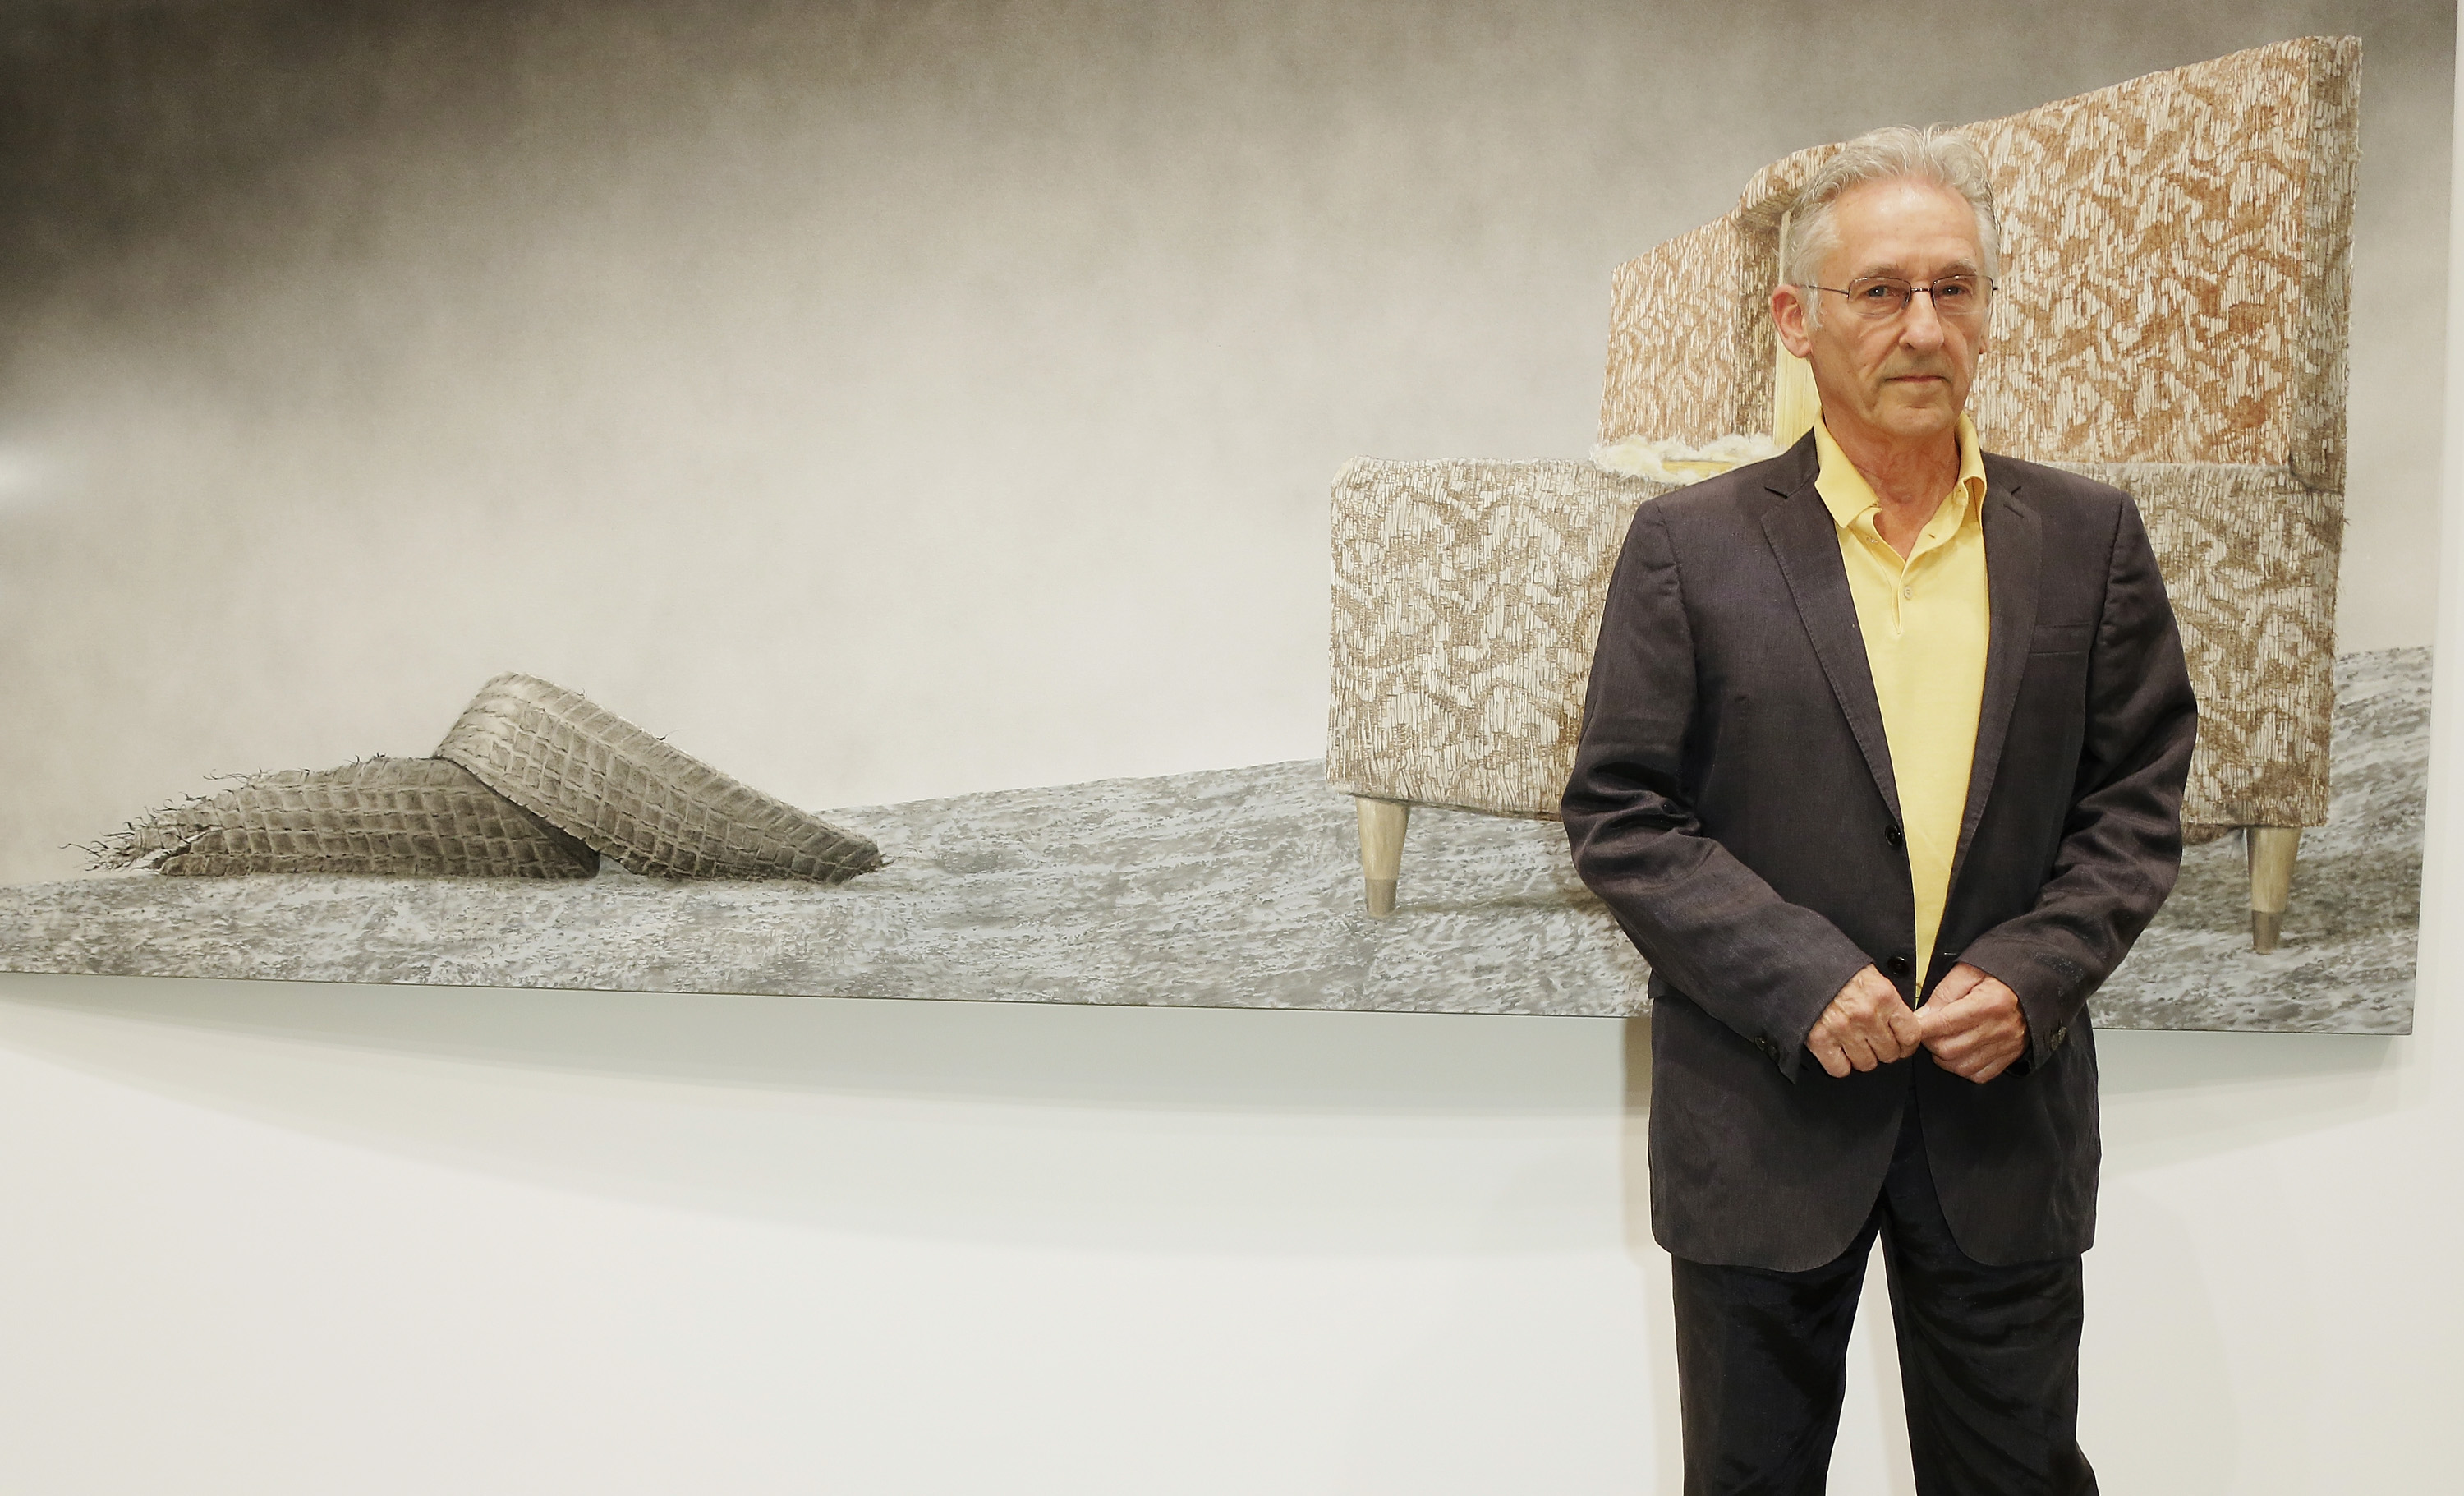 Artist Ed Ruscha attends the Ed Ruscha Paintings Opening Reception at Galleria Gagosian on November 20, 2014 in Rome, Italy.  (Photo by Ernesto Ruscio/Getty Images)